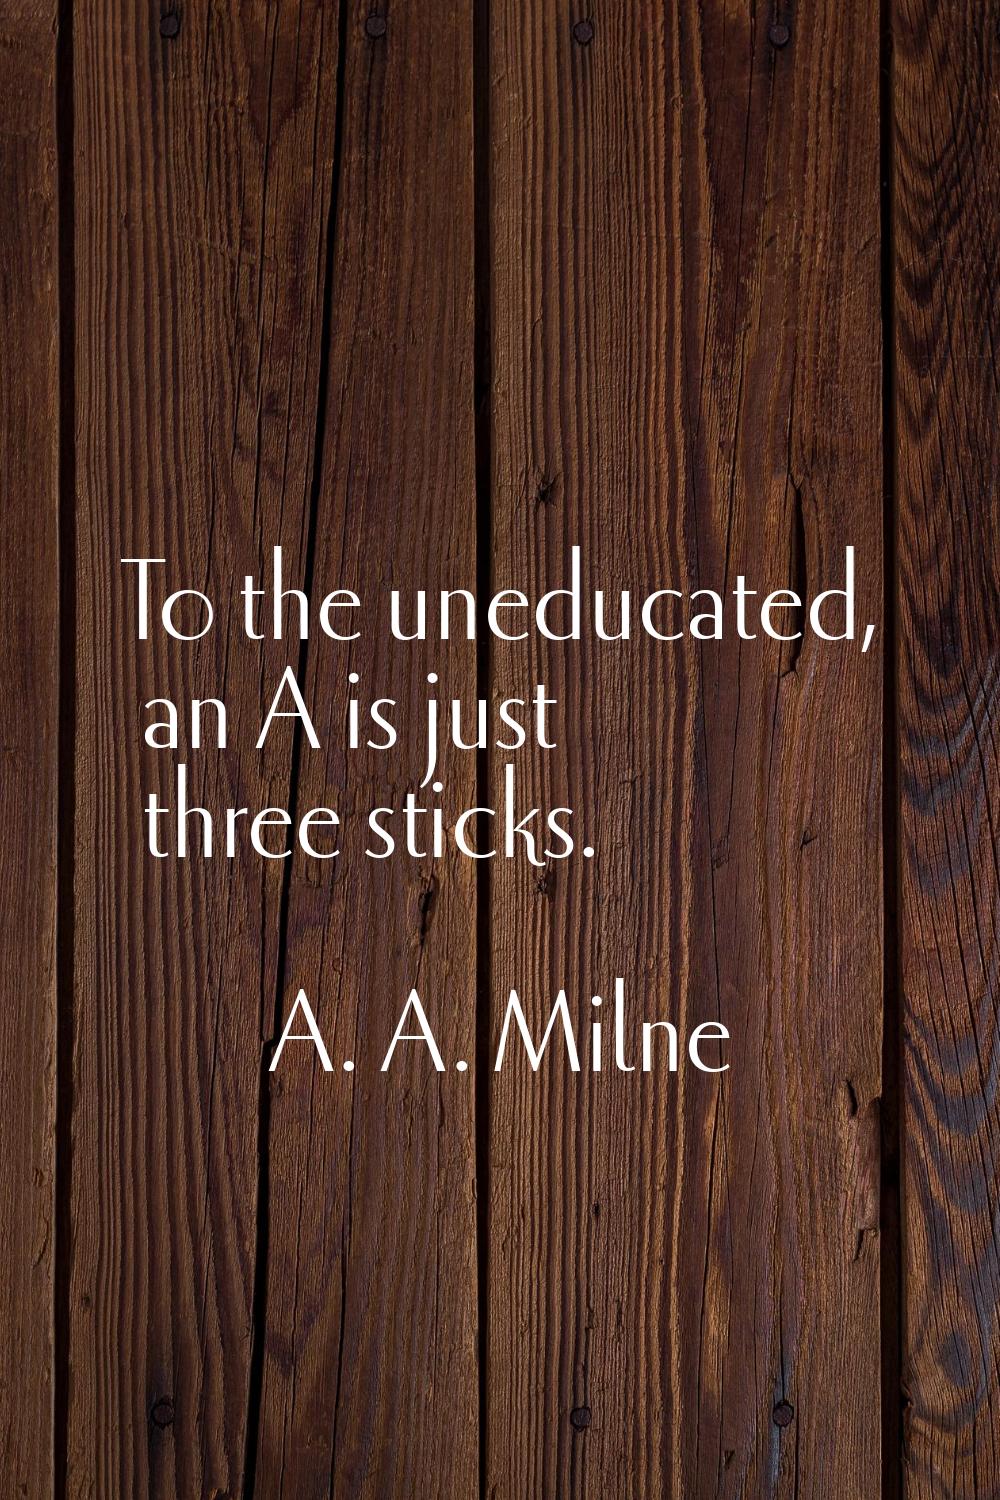 To the uneducated, an A is just three sticks.